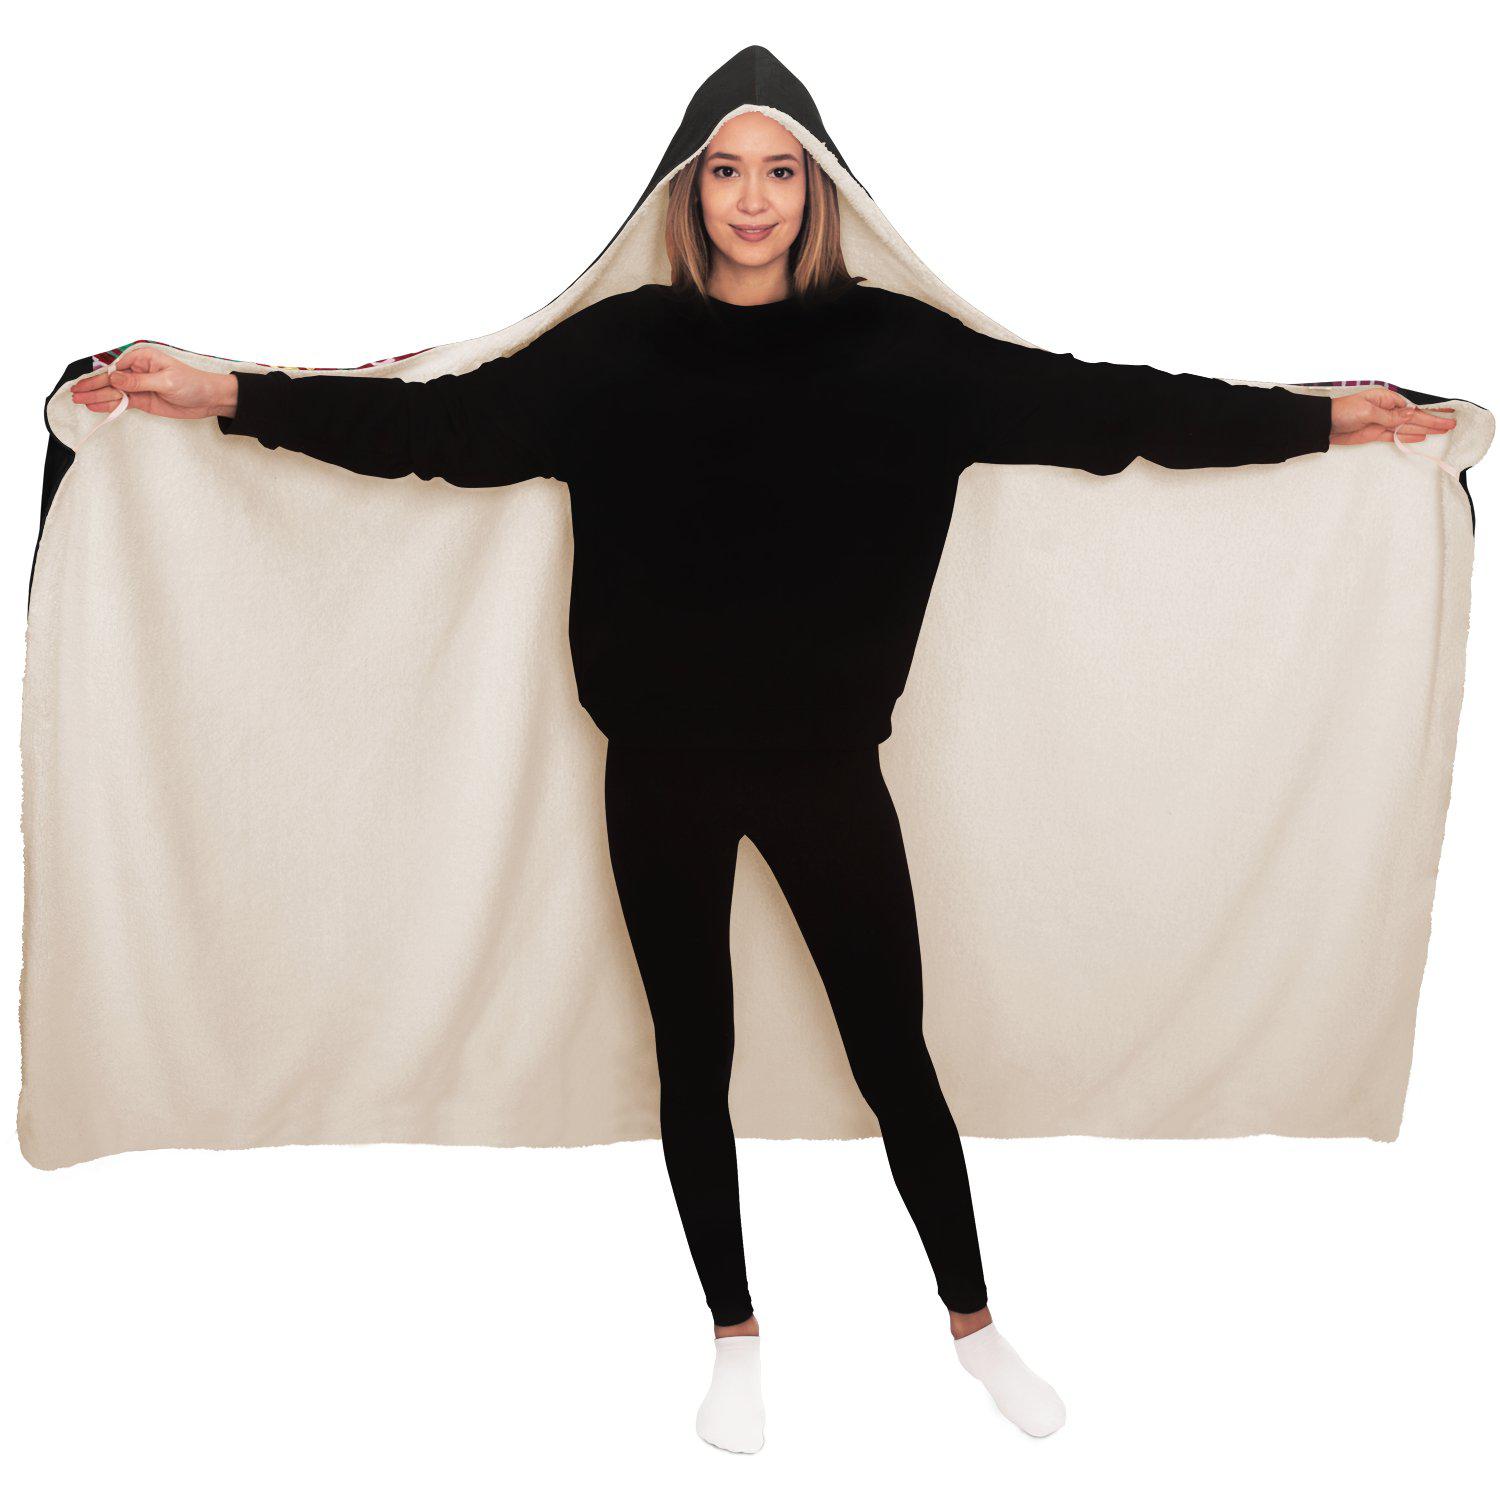 Hooded Blanket - AOP Maio Traditional Embroidery Inspired Hooded Blanket